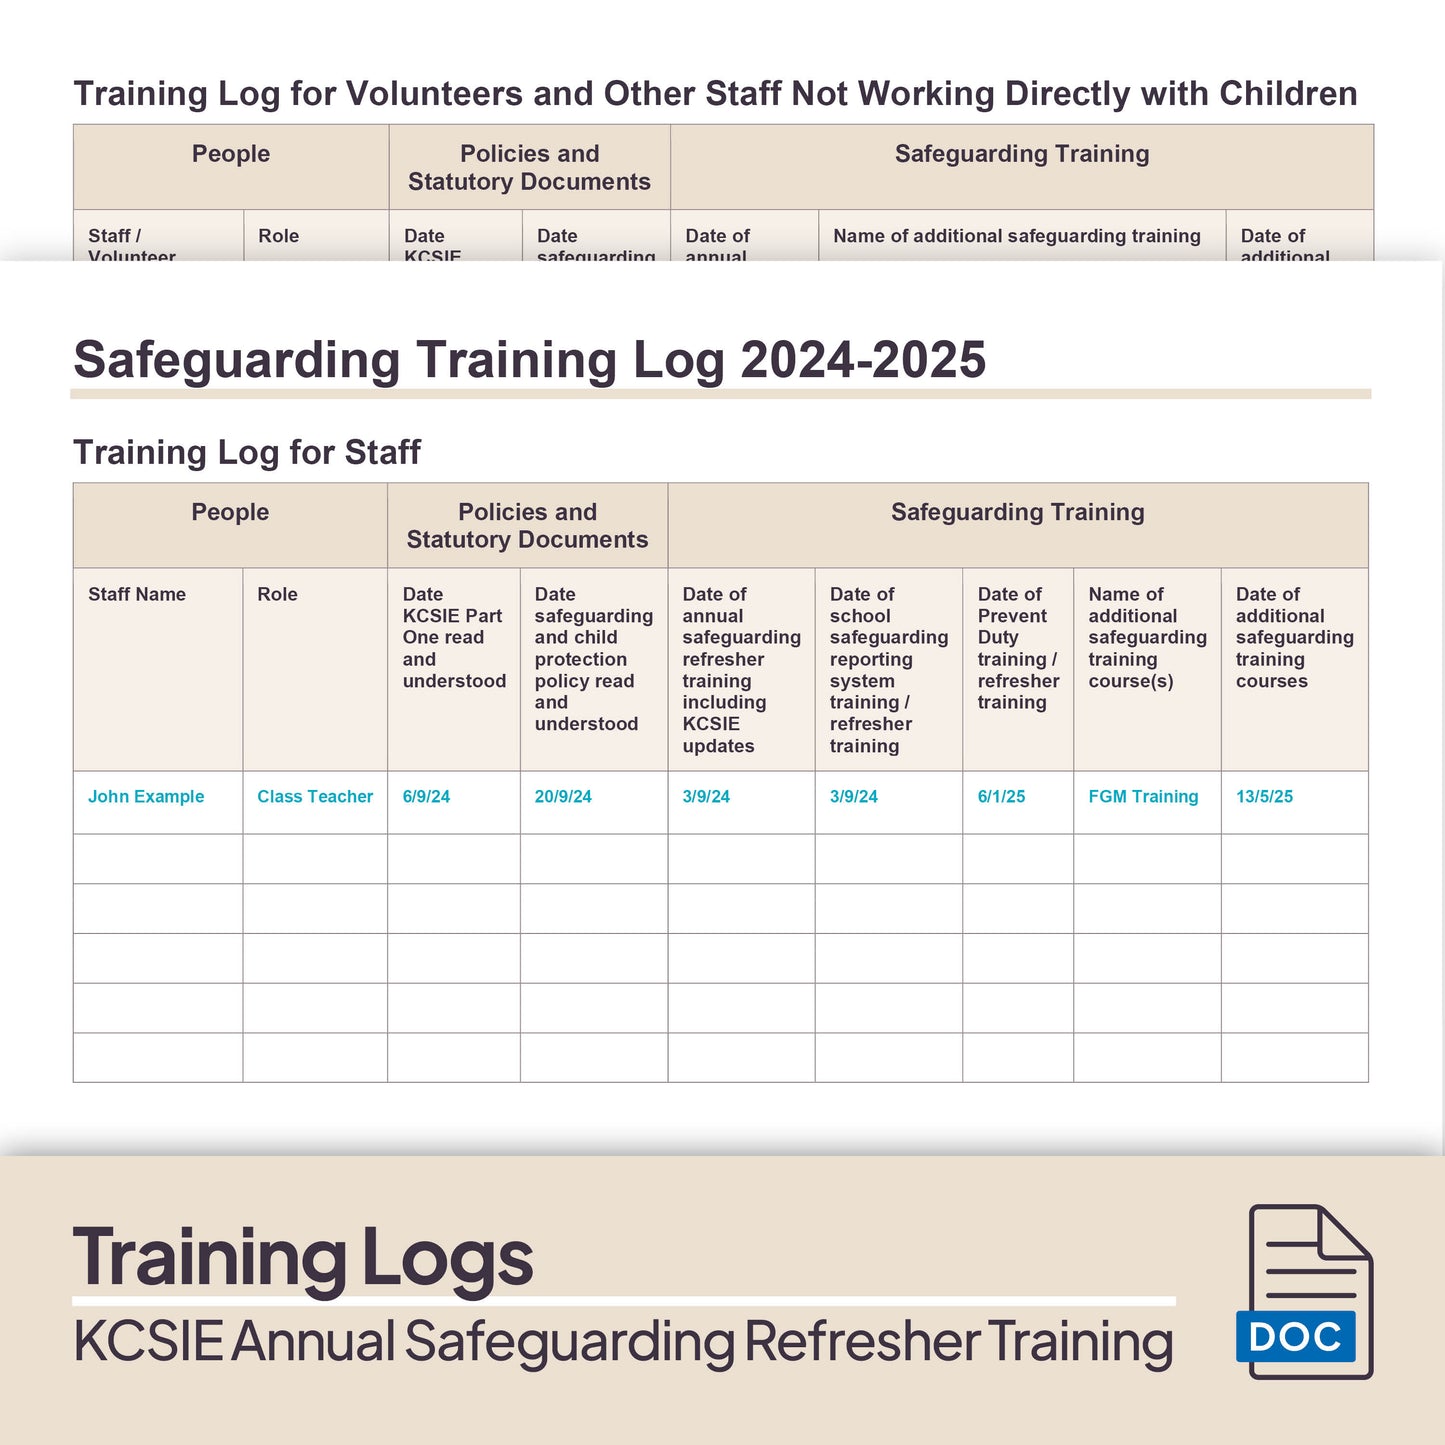 KCSIE Annual Safeguarding Refresher Training 2024